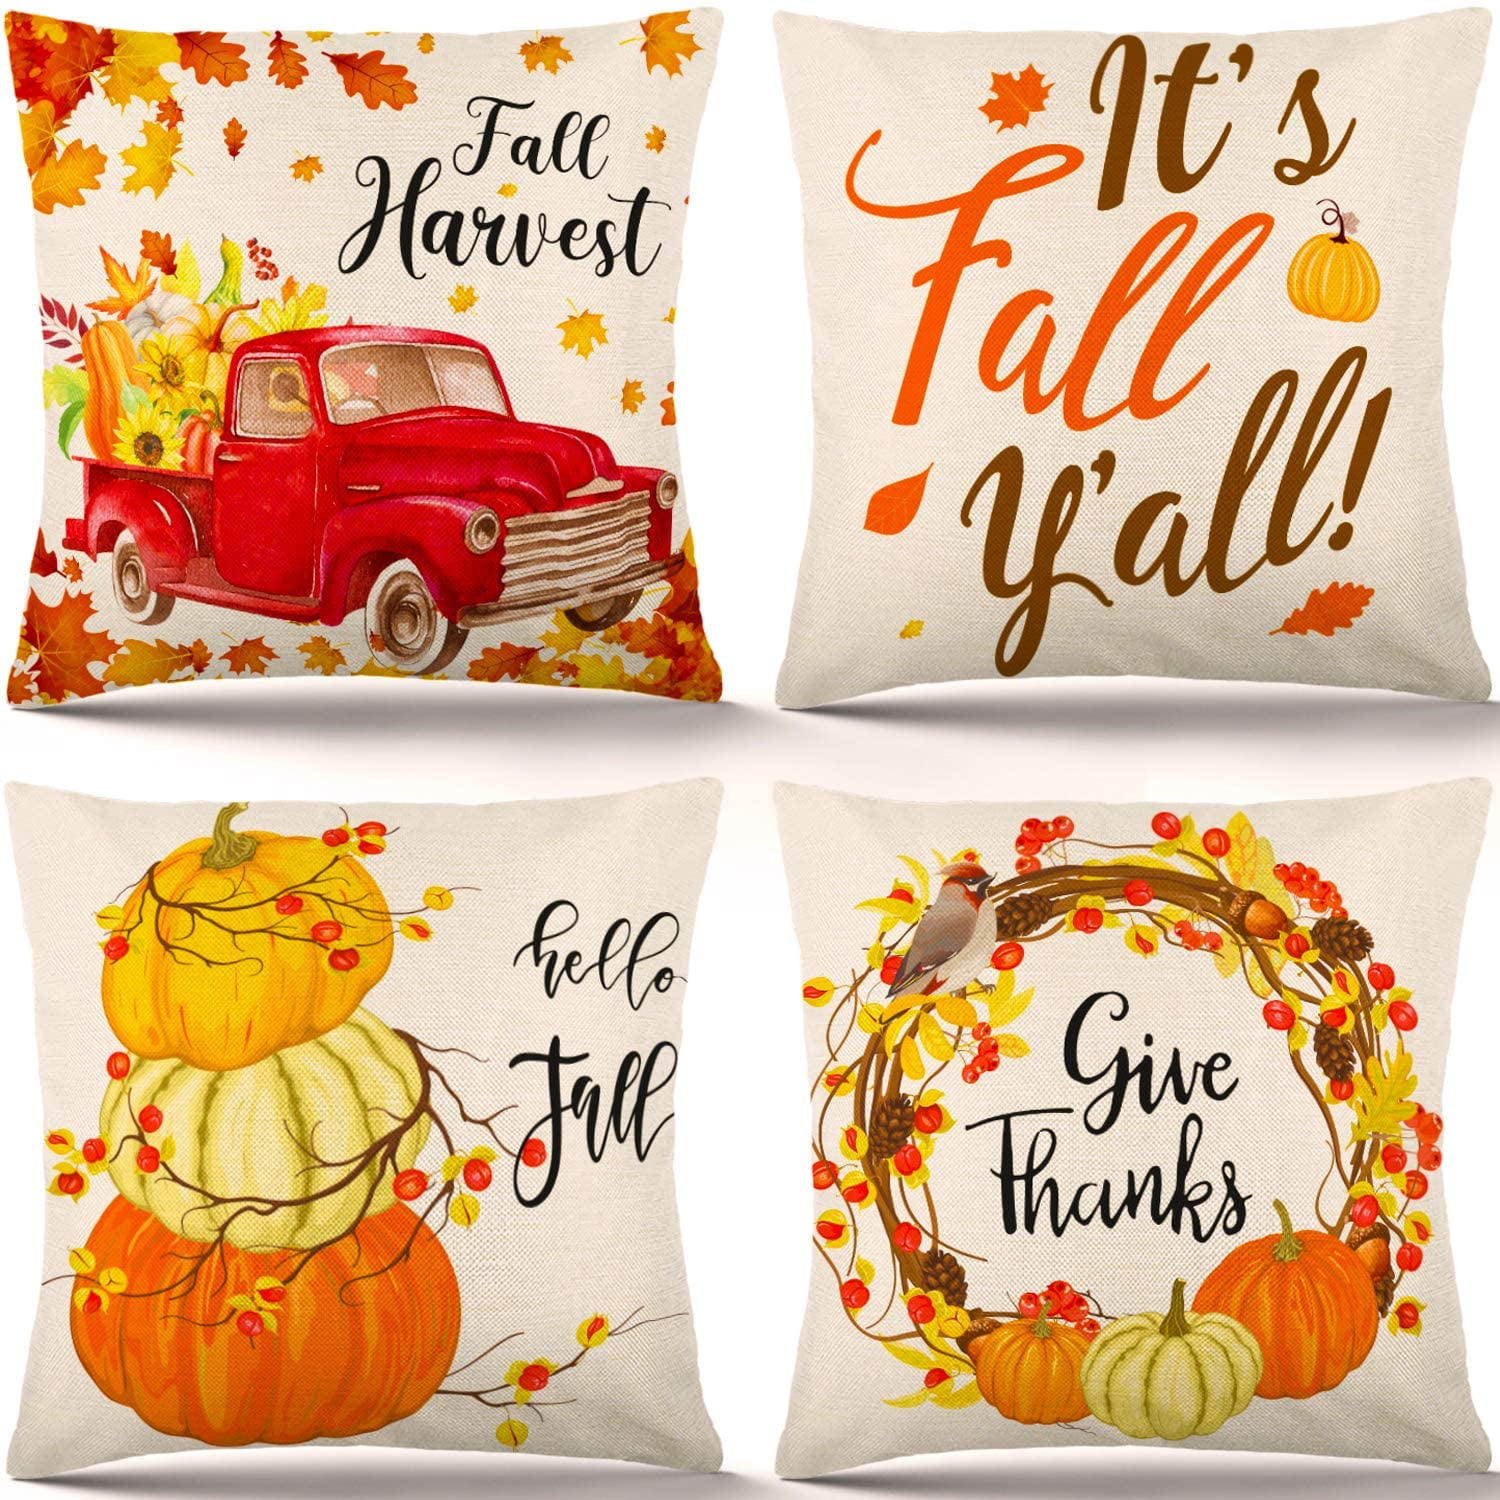 Fall Decor Throw Pillow Covers 18 X 18 Inch Set of 4 Thanksgiving Pumpkin Cushion Covers Linen Fabric Pillowcases Farmhouse Decorations for Home Sofa Bedroom Car